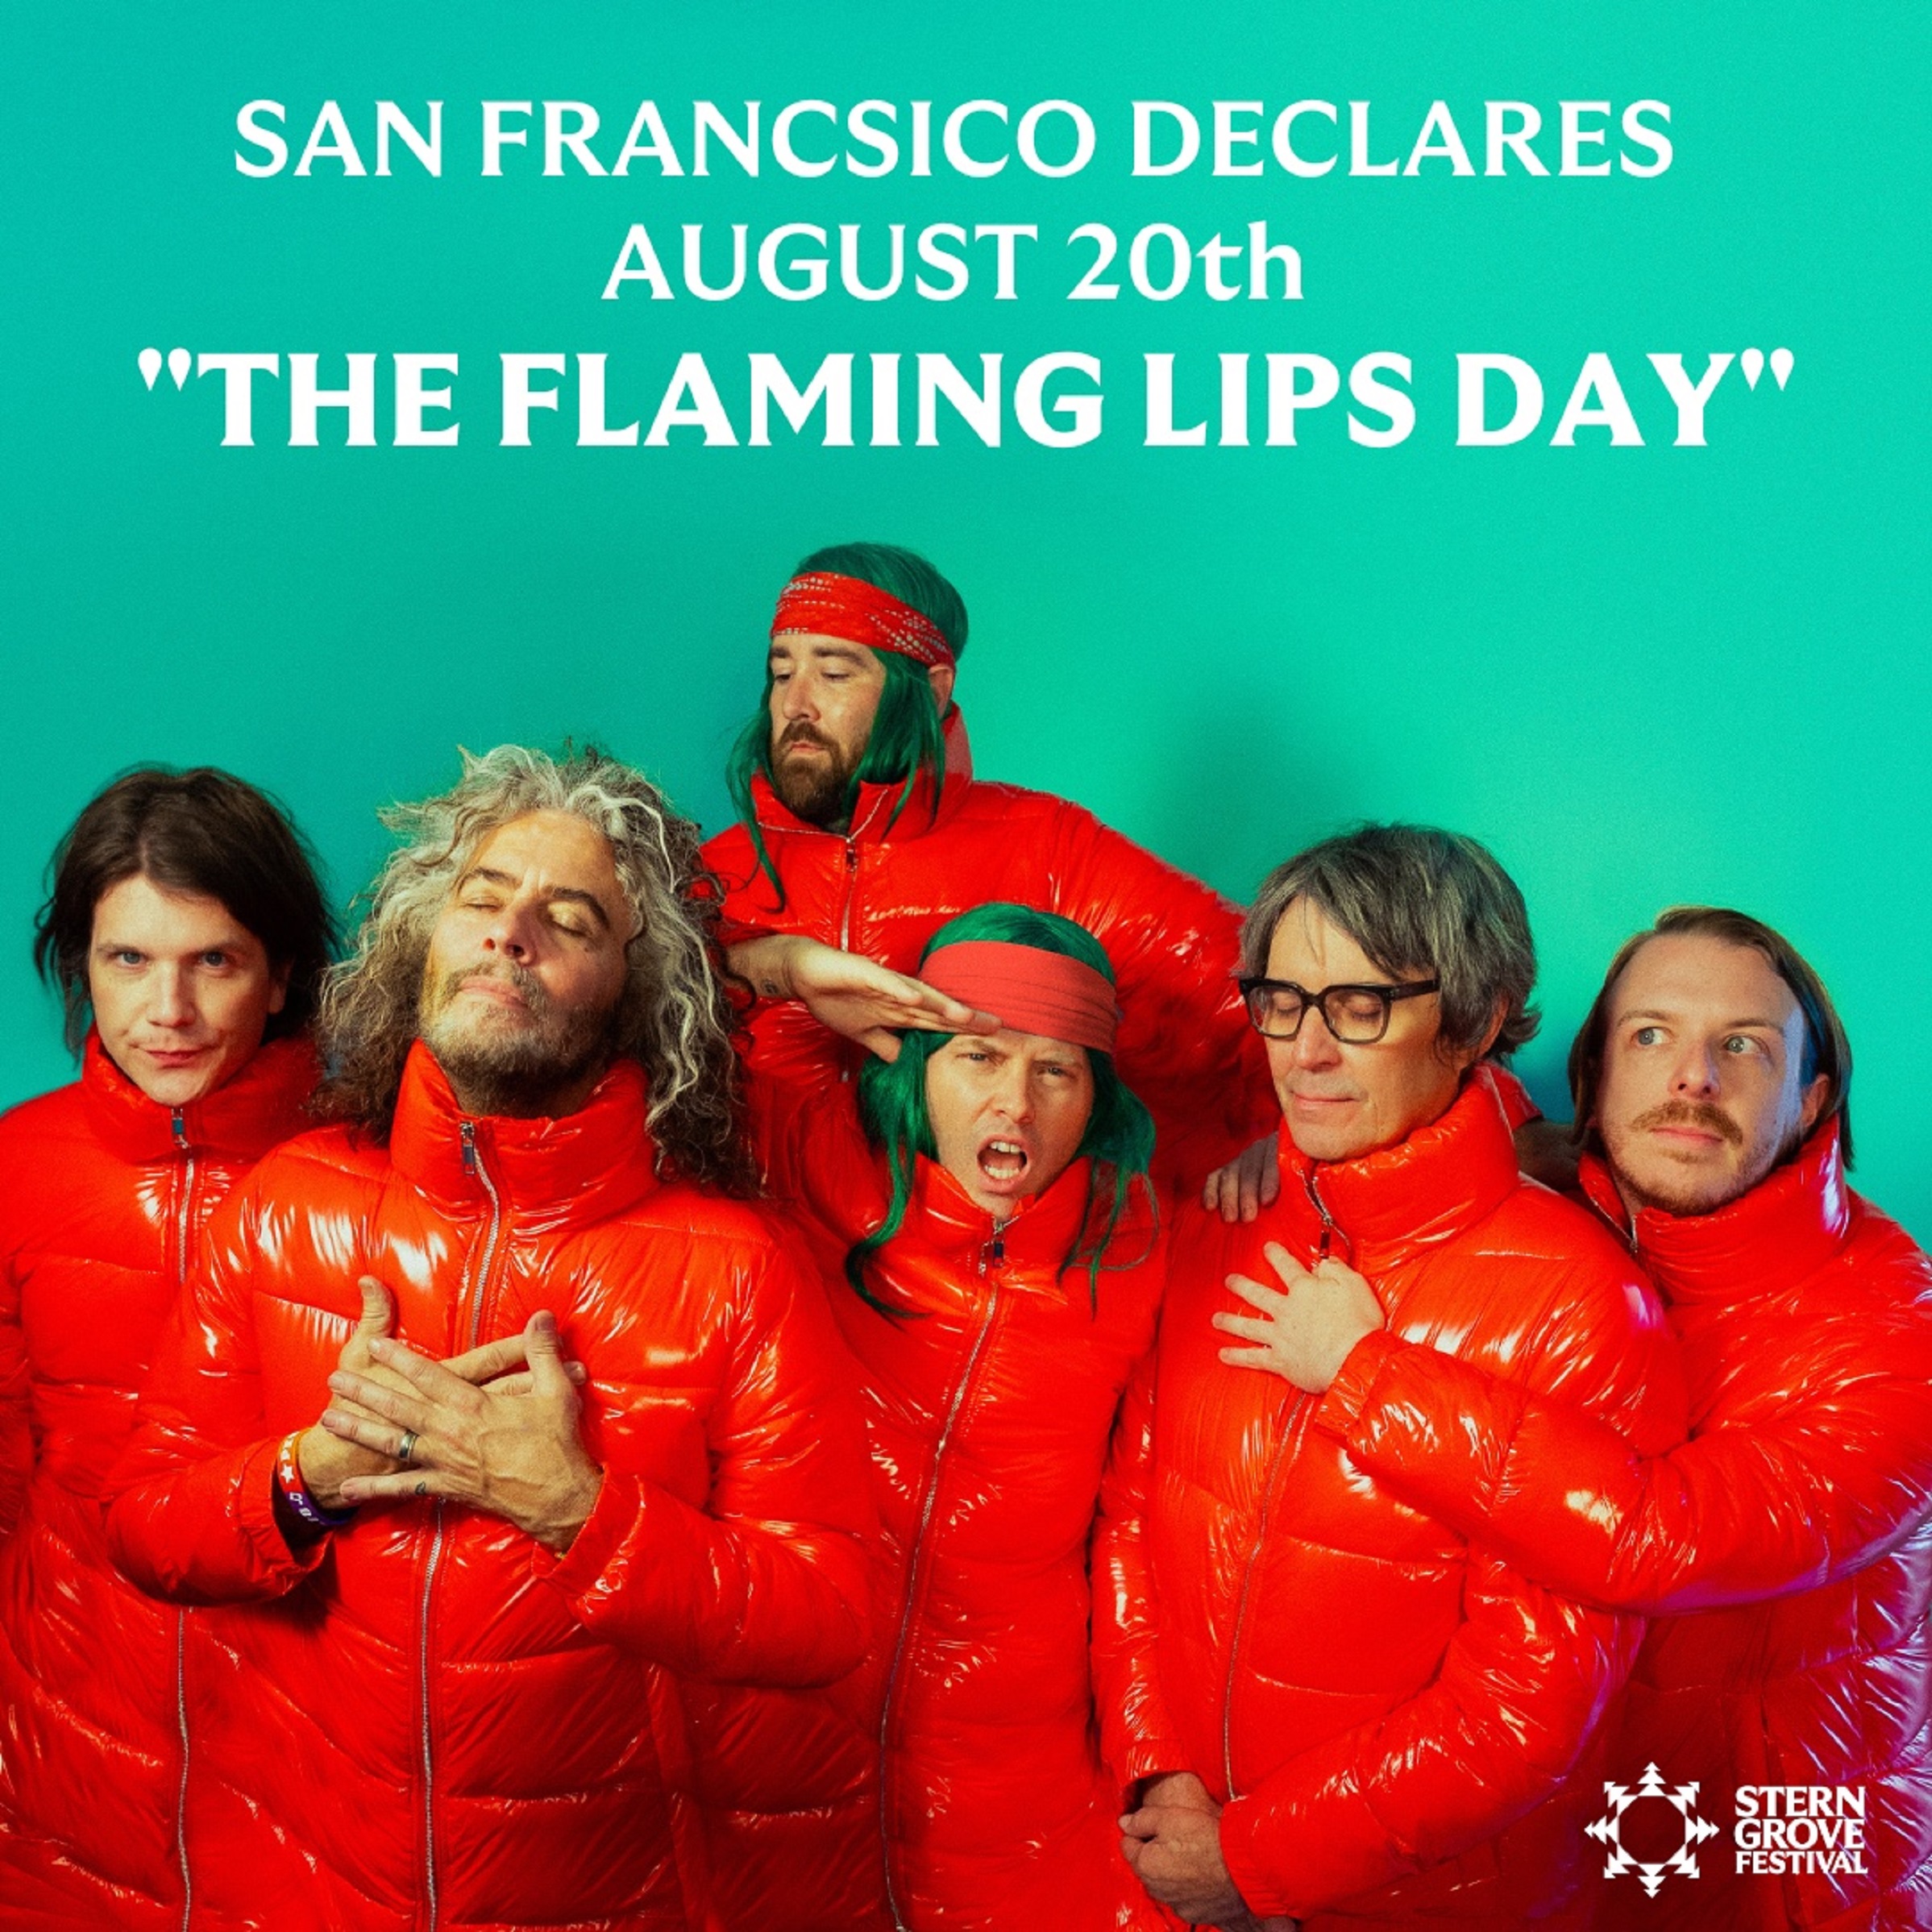 AUGUST 20 DECLARED AS “THE FLAMING LIPS DAY” IN CITY OF SAN FRANCISCO